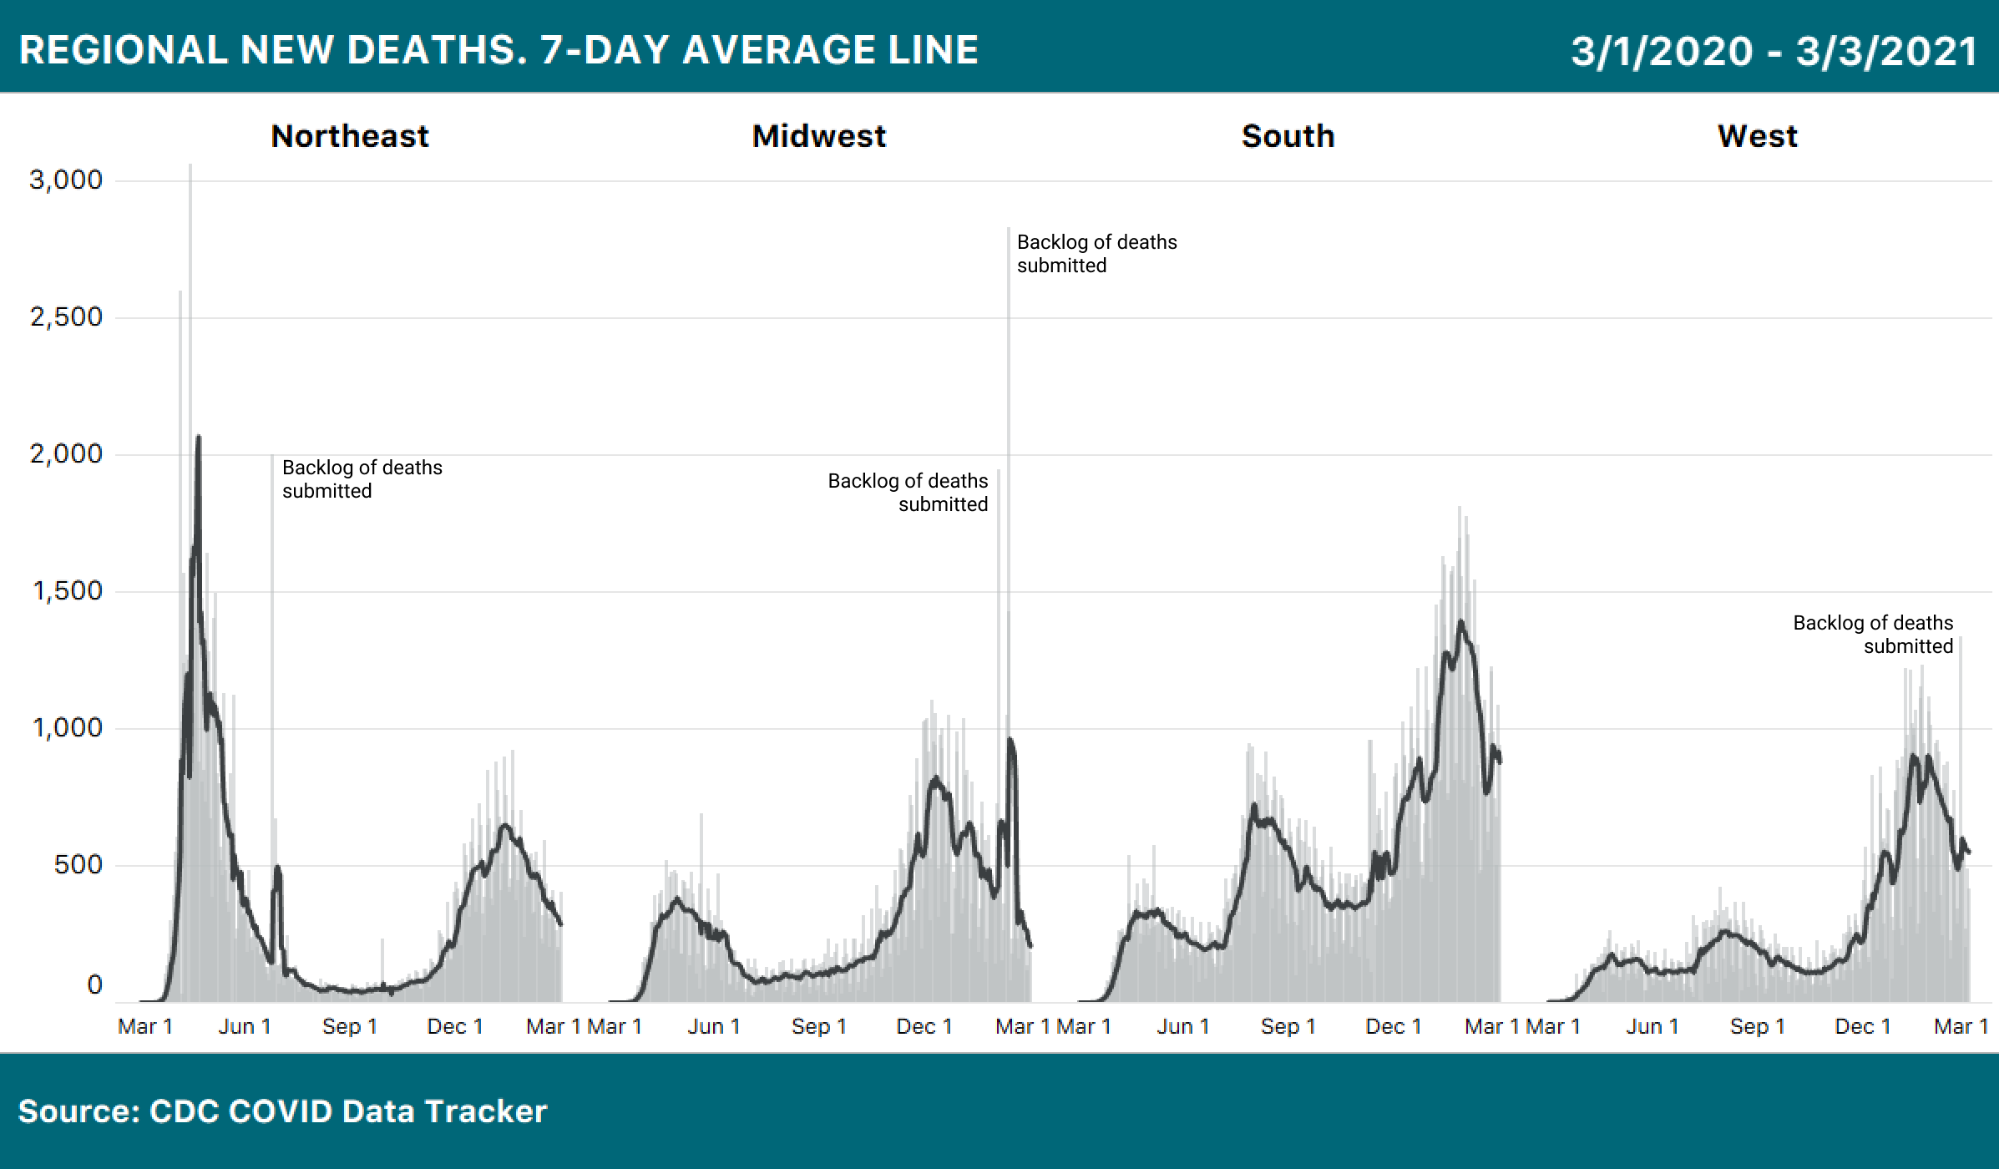 4 daily bar charts with 7-day average line overlaid showing COVID-19 deaths in each major US region. Deaths are trending down in all regions (with some wobbles in the South due to inconsistent reporting).